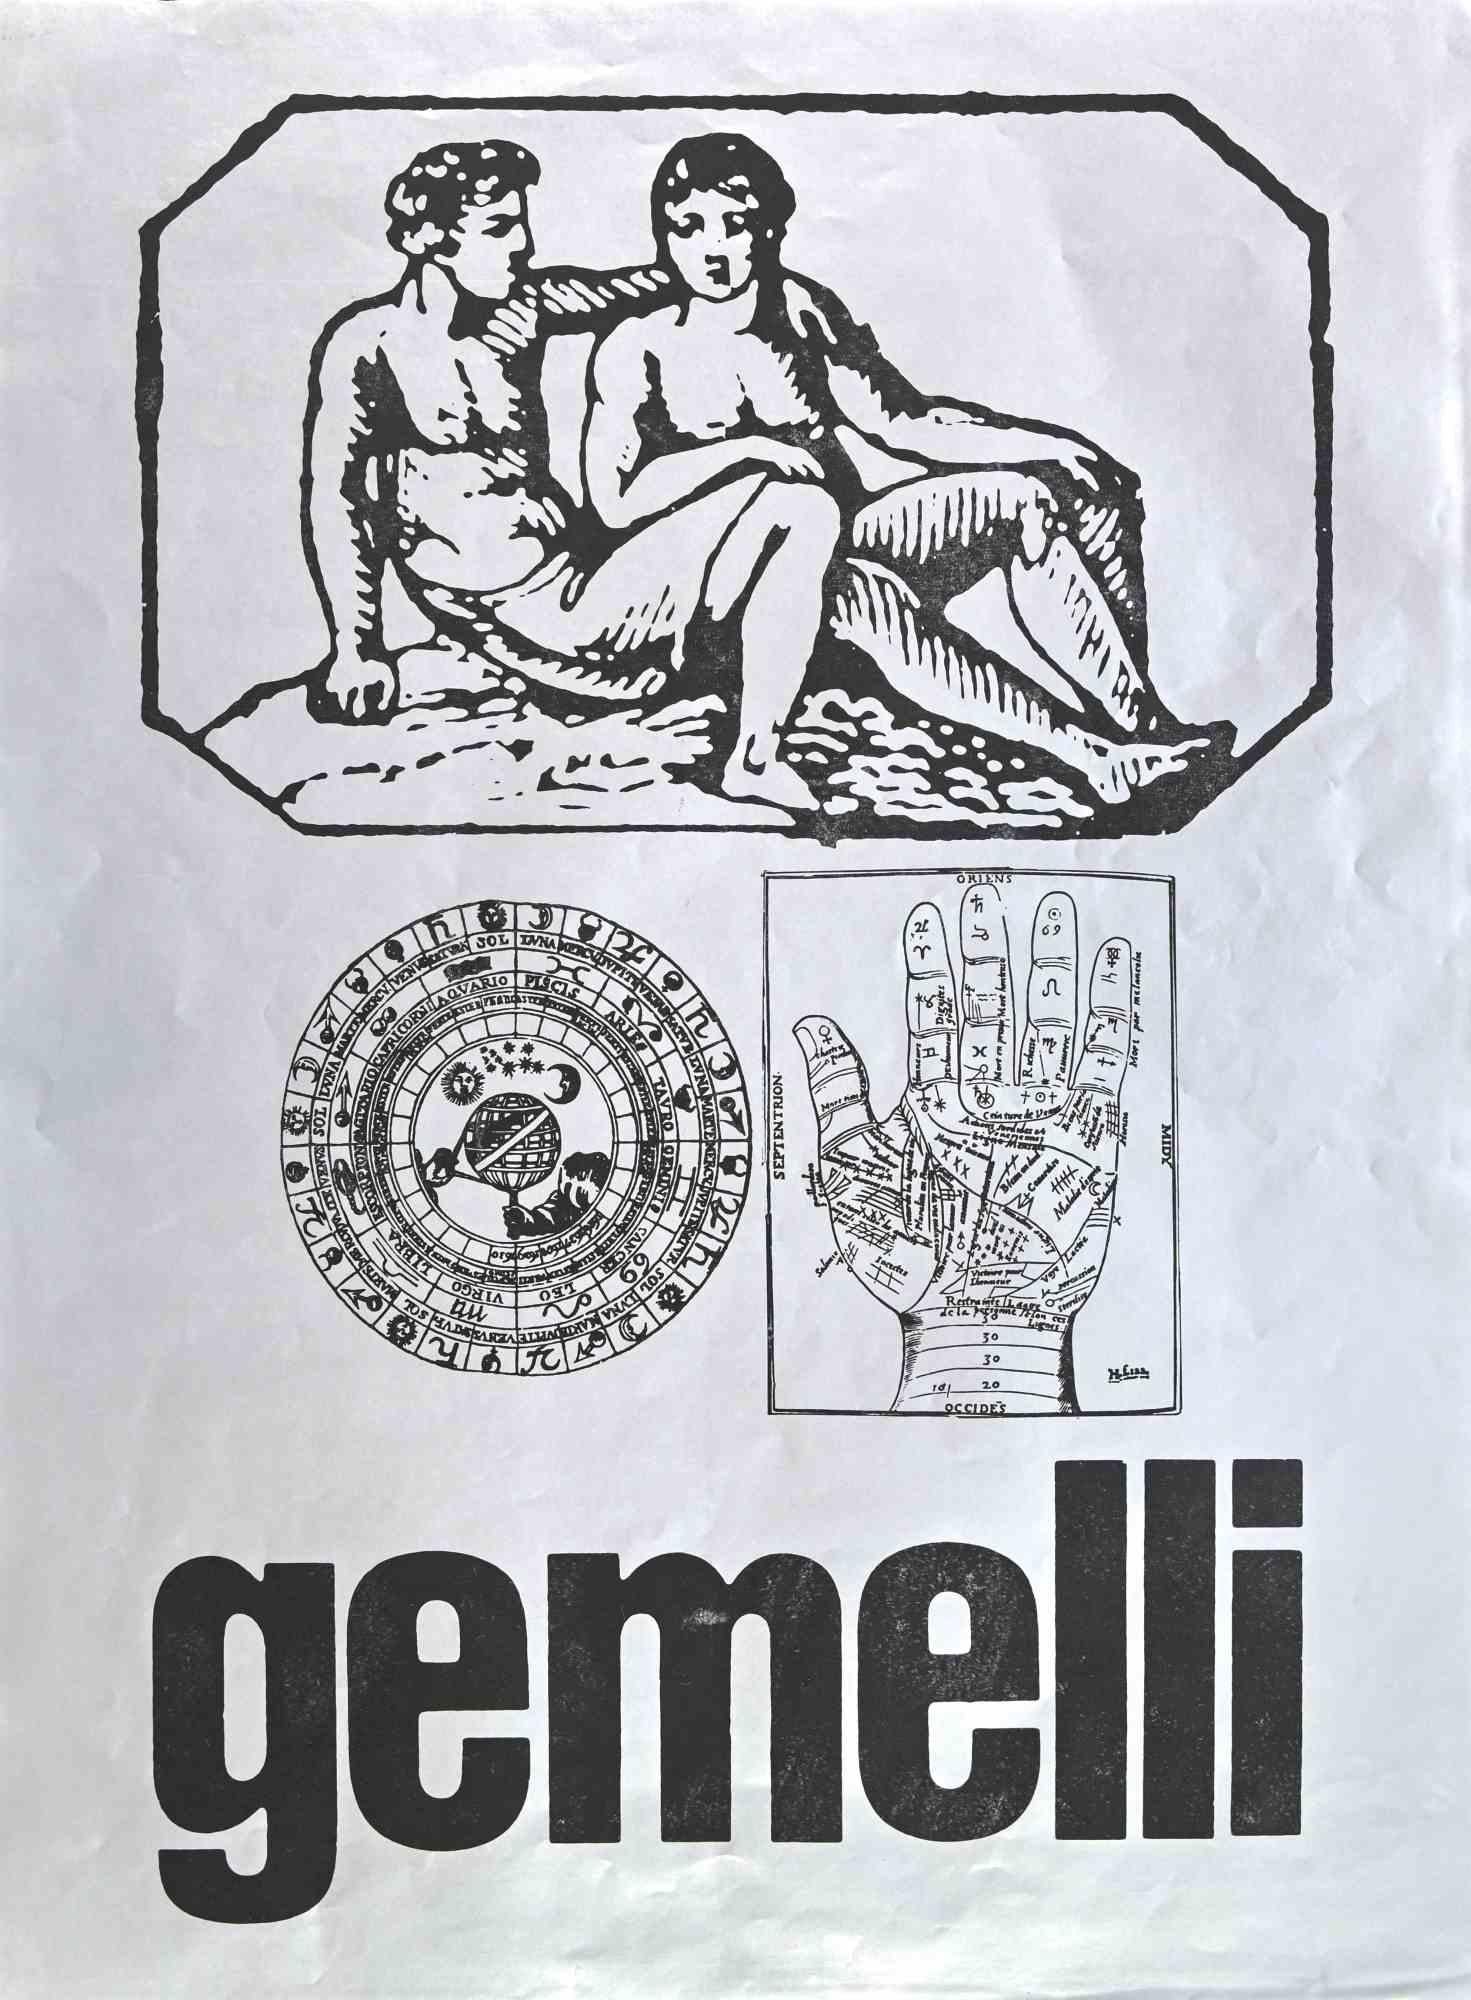 Gemini  is an screen print on grey paper realized by Sergio Barletta in 1973. 

68 x 49 cm.

Good condition.

 
Sergio Barletta  (1934) is an Italian cartoonist and illustrator, who has also published some humorous and political satire books. From